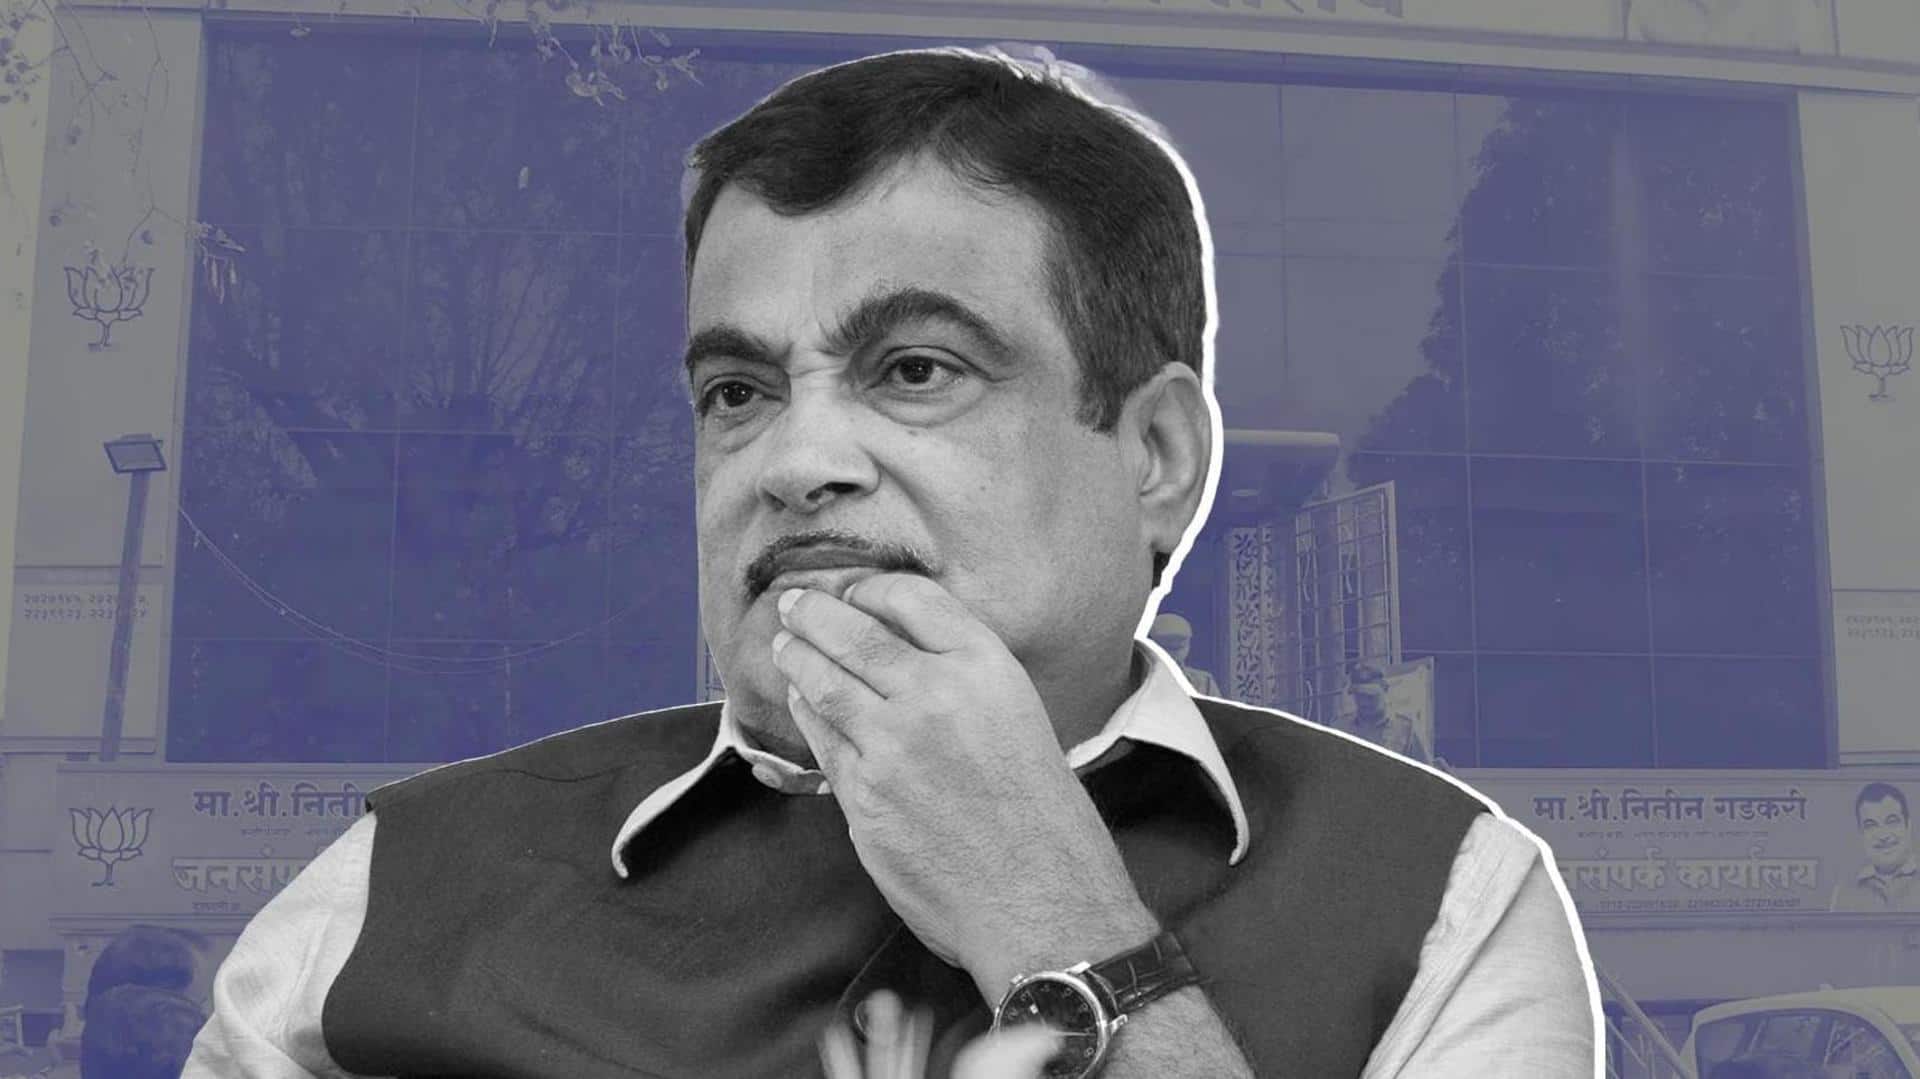 Nitin Gadkari receives another death threat over phone call: Report